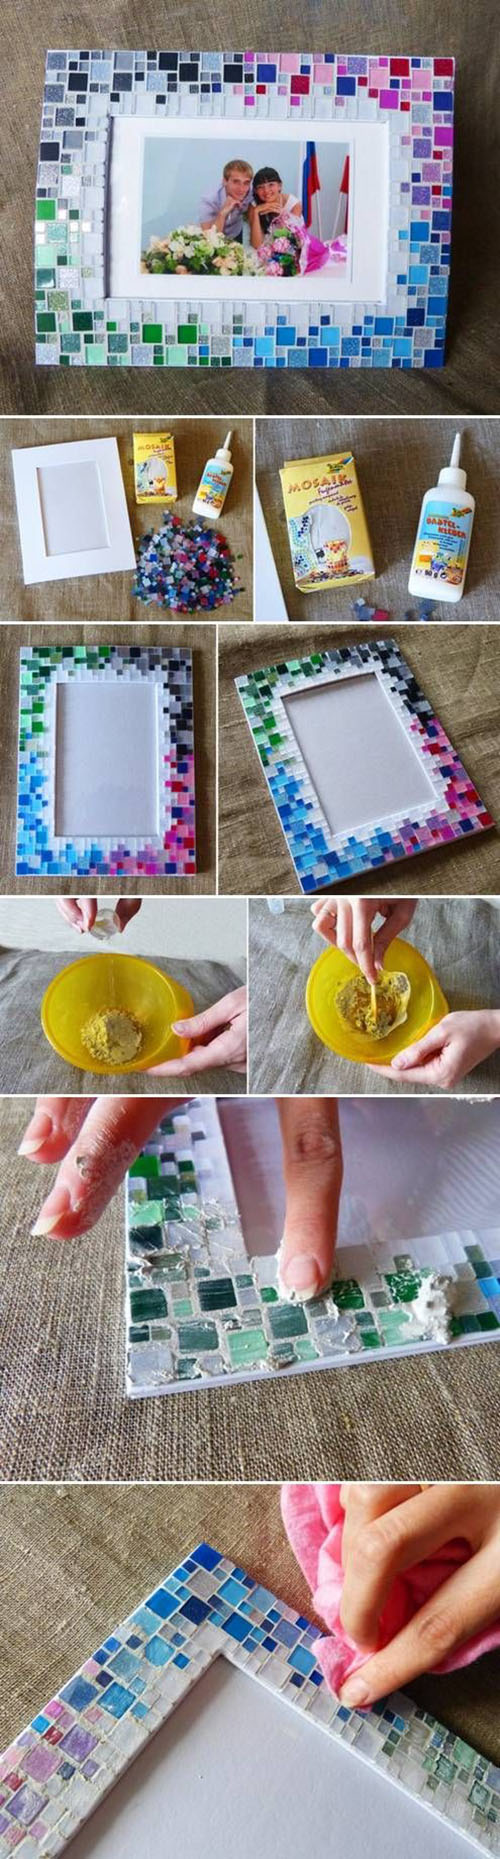 6  DIY Colorful Mosaic Picture Frame085d7a